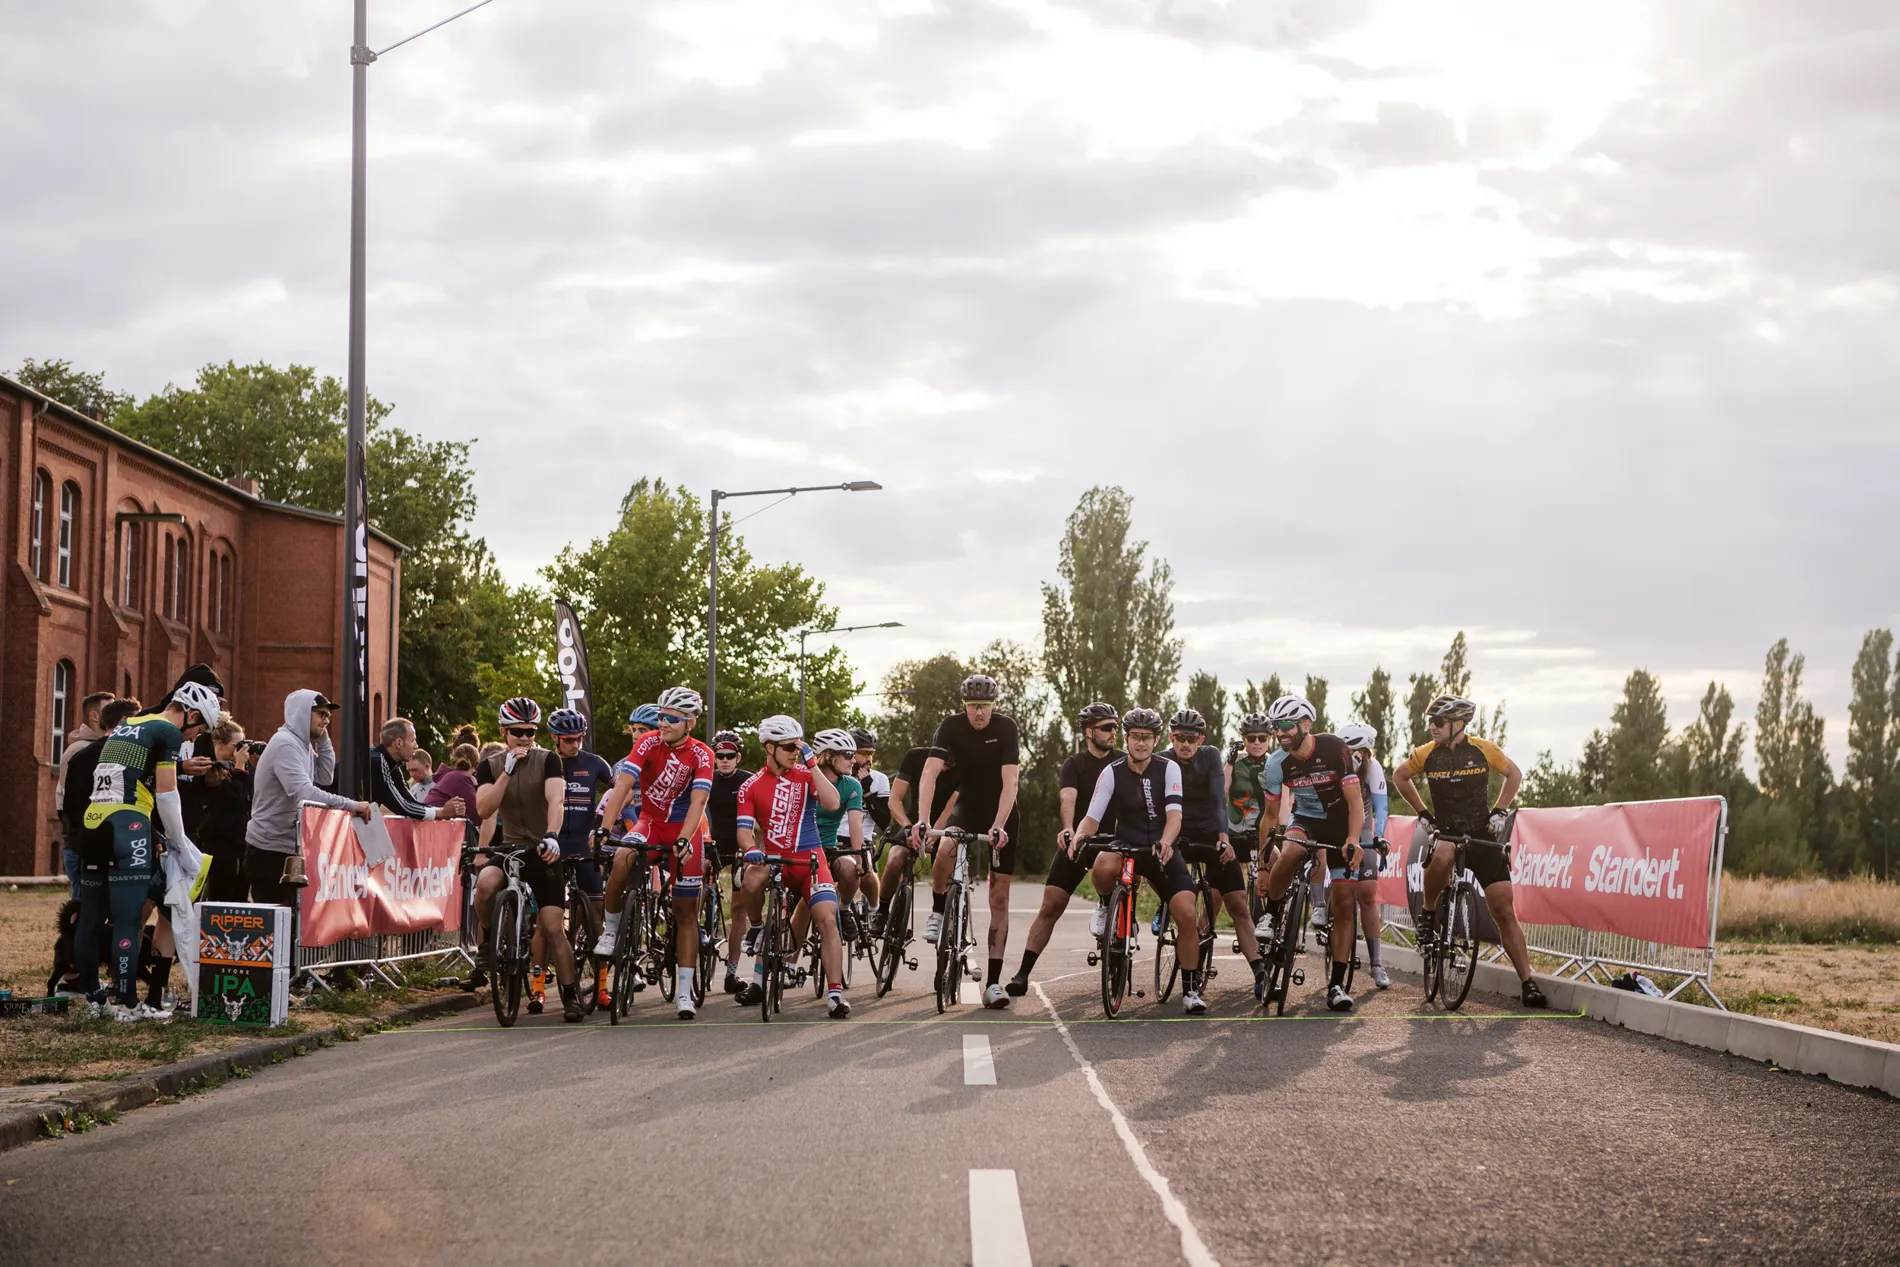 The SBSB Crit Race II organized by Standert Bicycles and Stone Brew Berlin